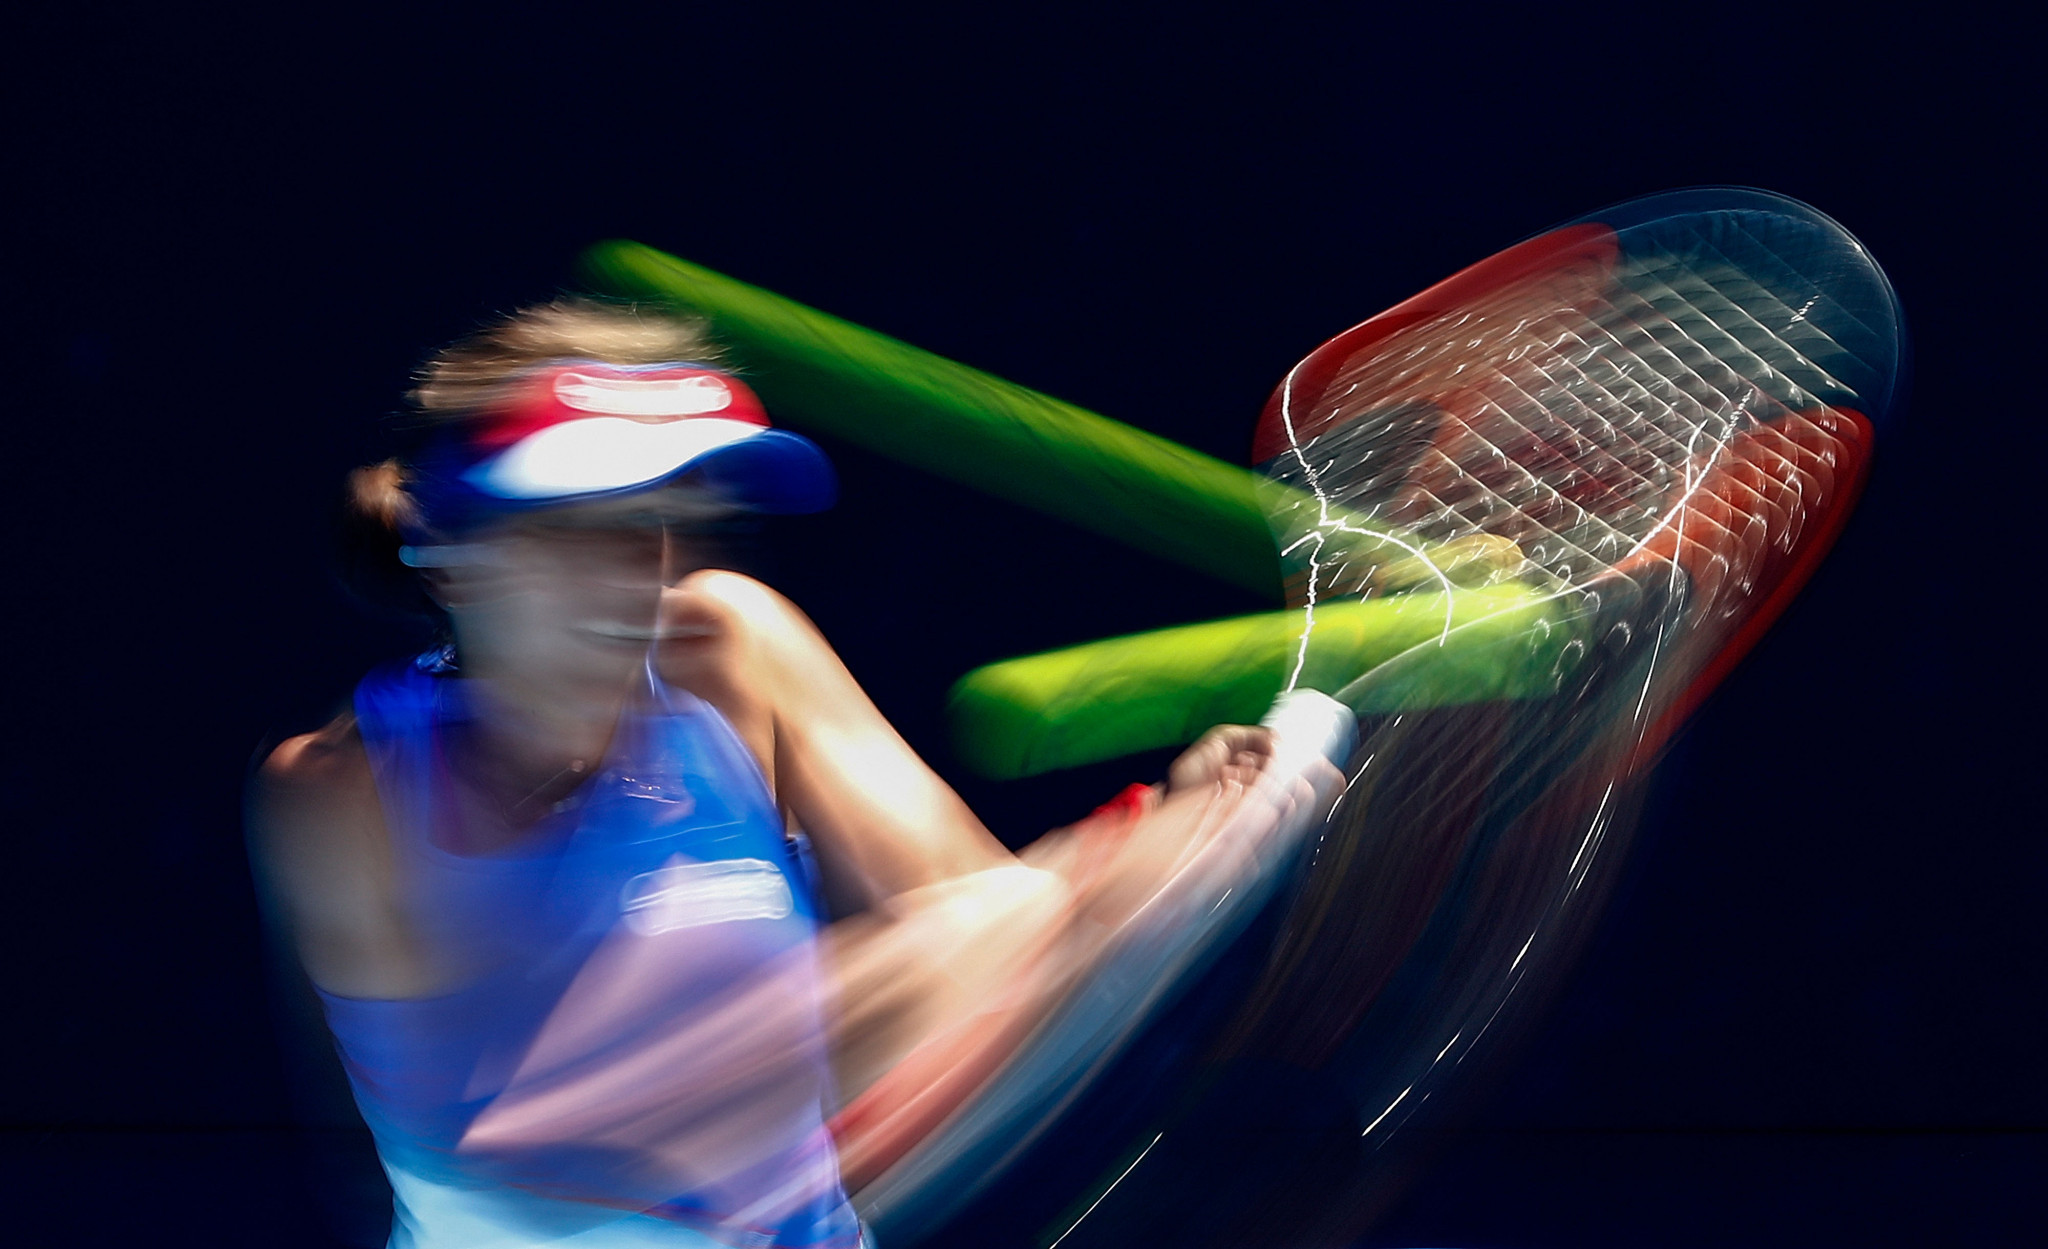 A blurred picture captures a backhand by Barbora Strycova of the Czech Republic ©Getty Images